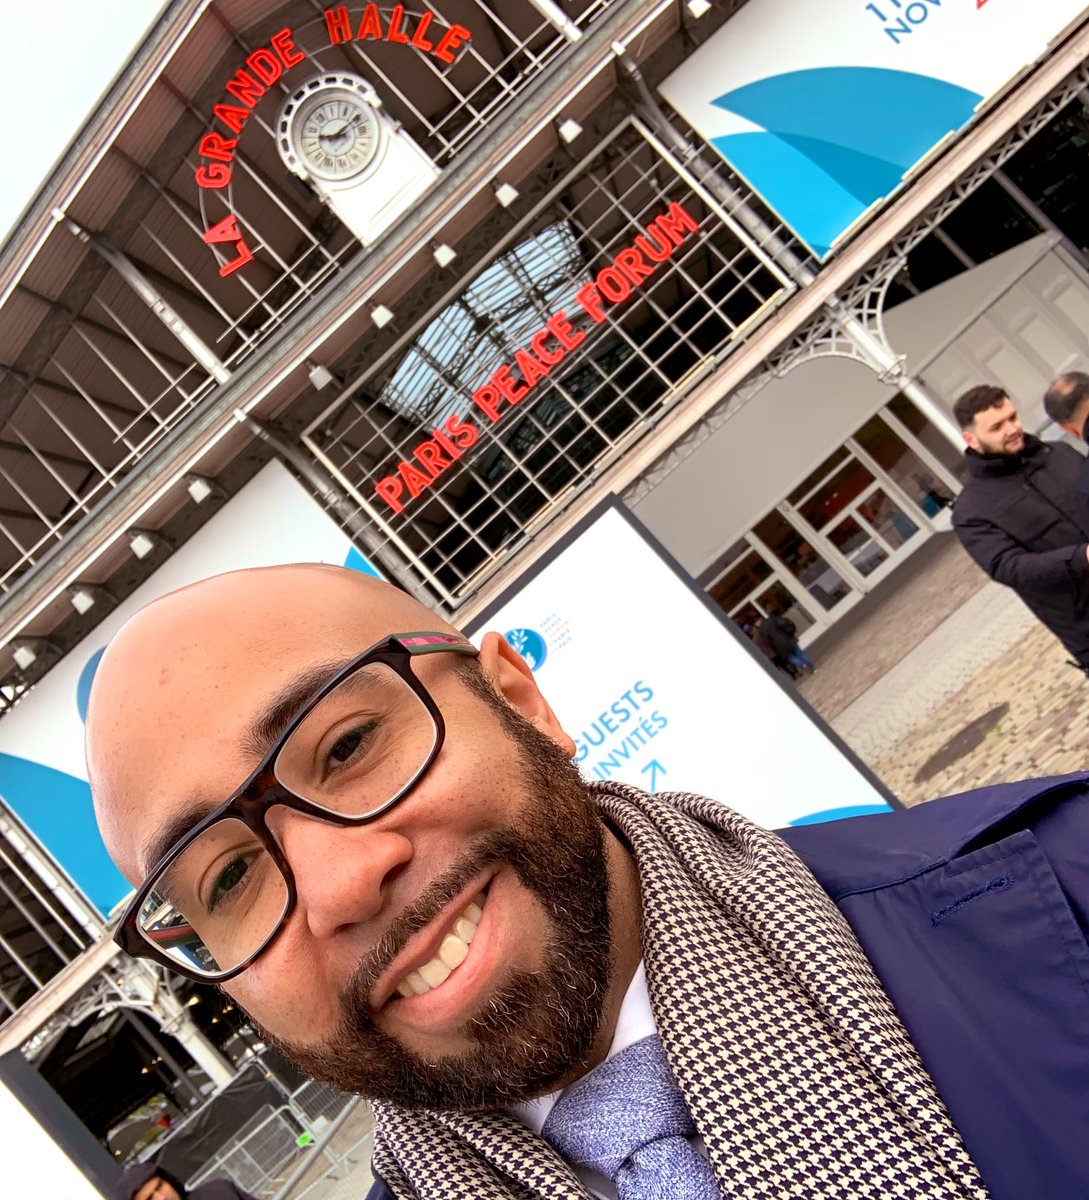 Dispatches from the #ParisPeaceForum2019! Tremendous conversations so far on #politicalinclusion, #democraticgovernance, #opengovernment, & #civicspace. More US engagement is needed here.